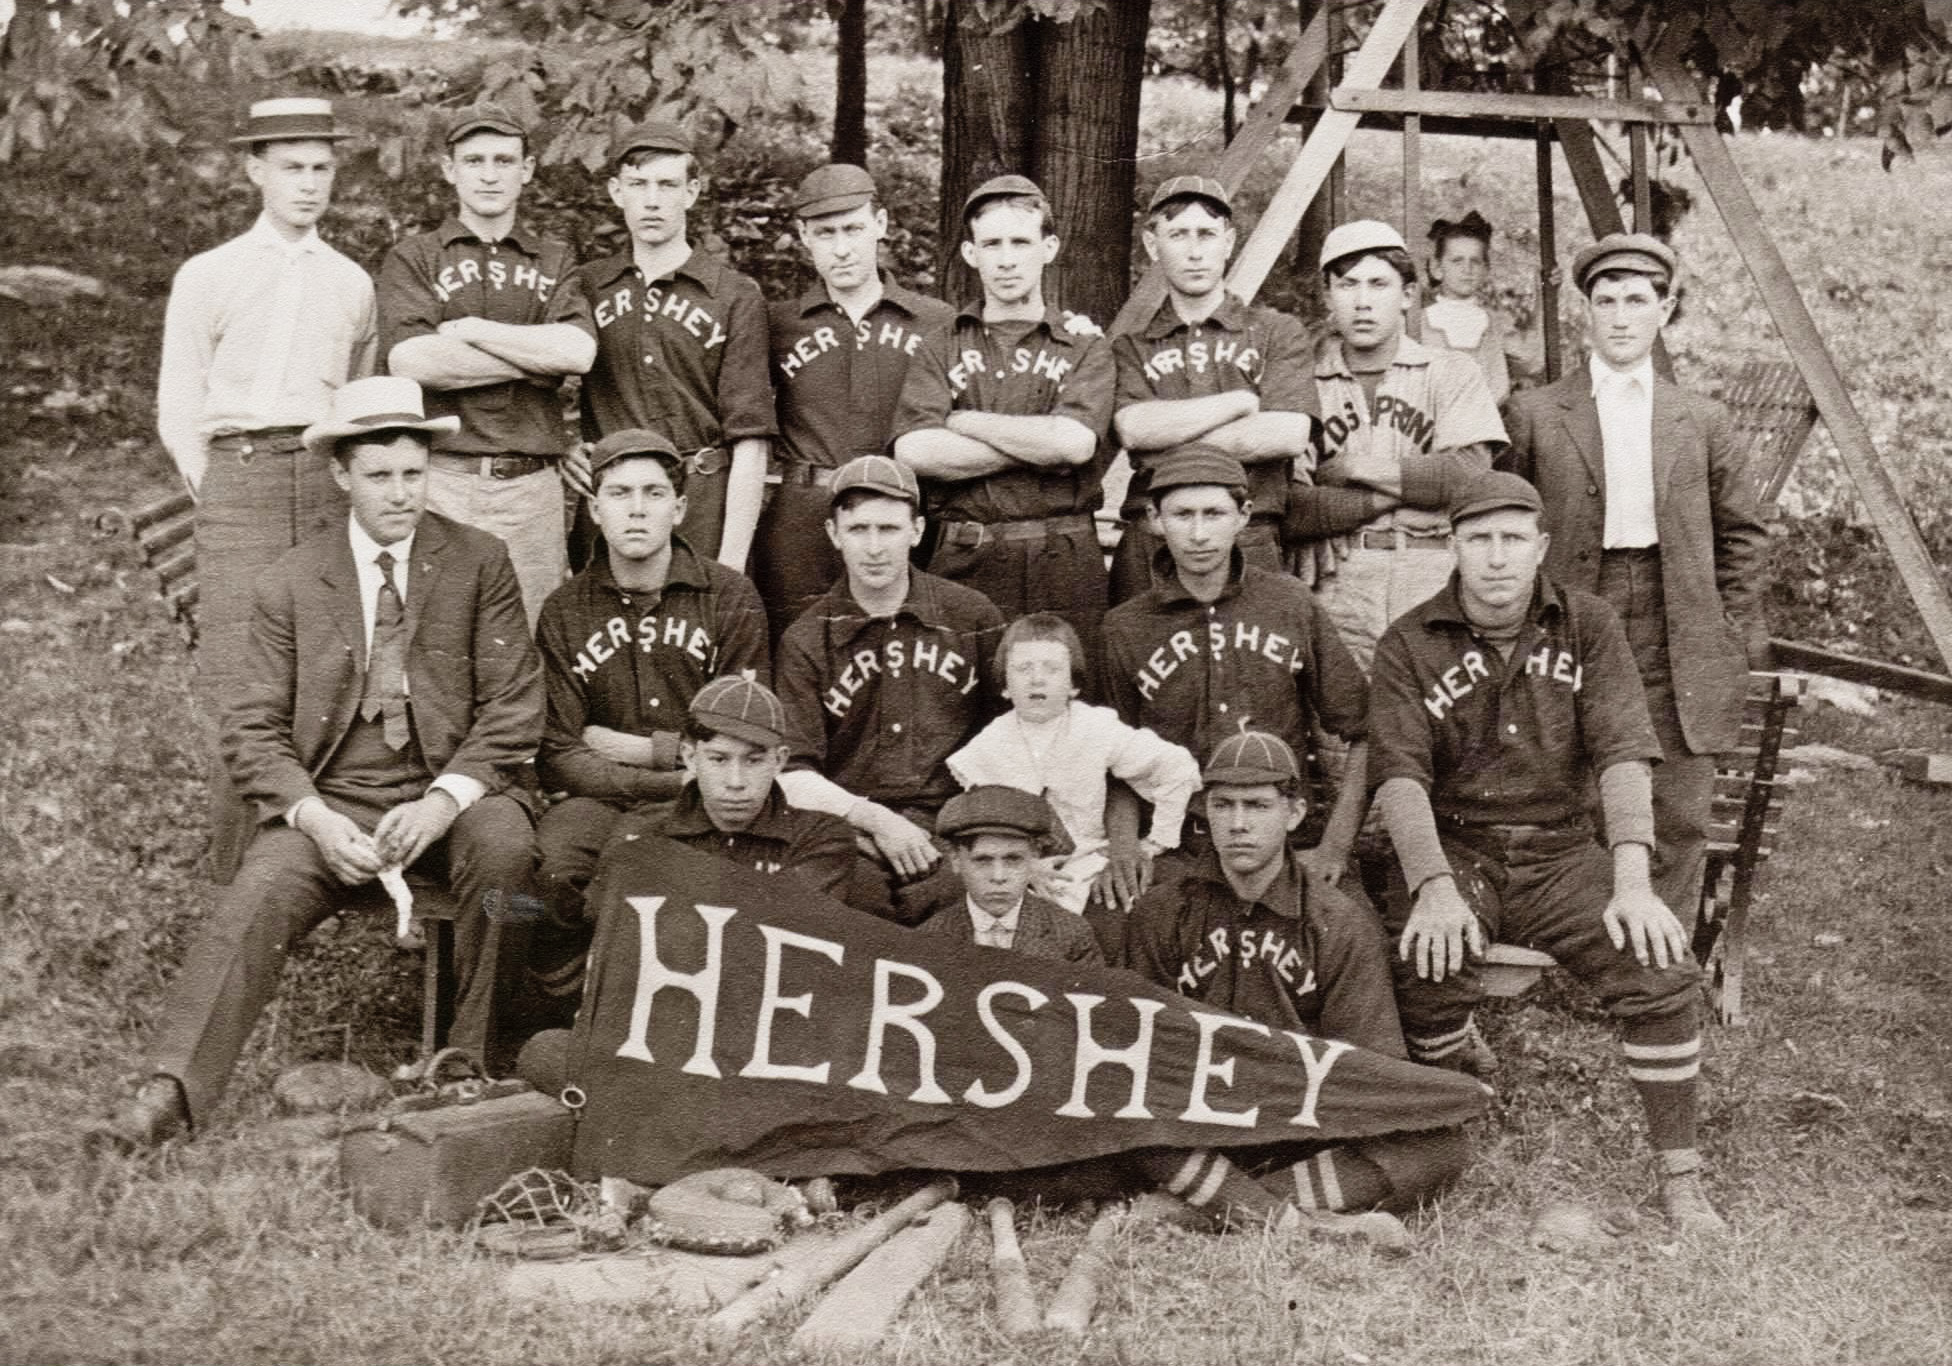 The Hershey Chocolate Company baseball team in the early 1900s. From the Klein Chocolate Company (no longer exists) archives, courtesy of William Klein III, whose grandfather, William Klein, founded the eponymous company and who is standing, last row, left, in the white shirt. He worked for Milton Hershey very early in the history of that chocolate company, then started his own enterprise with his brother in Elizabethtown, Pennsylvania, before World War One. In its heyday Klein was the world's fifth largest chocolate company. Some 85 years after this photo and after my own career with Hershey, Bill Klein III was Best Man at my wedding. Small world. View full size.